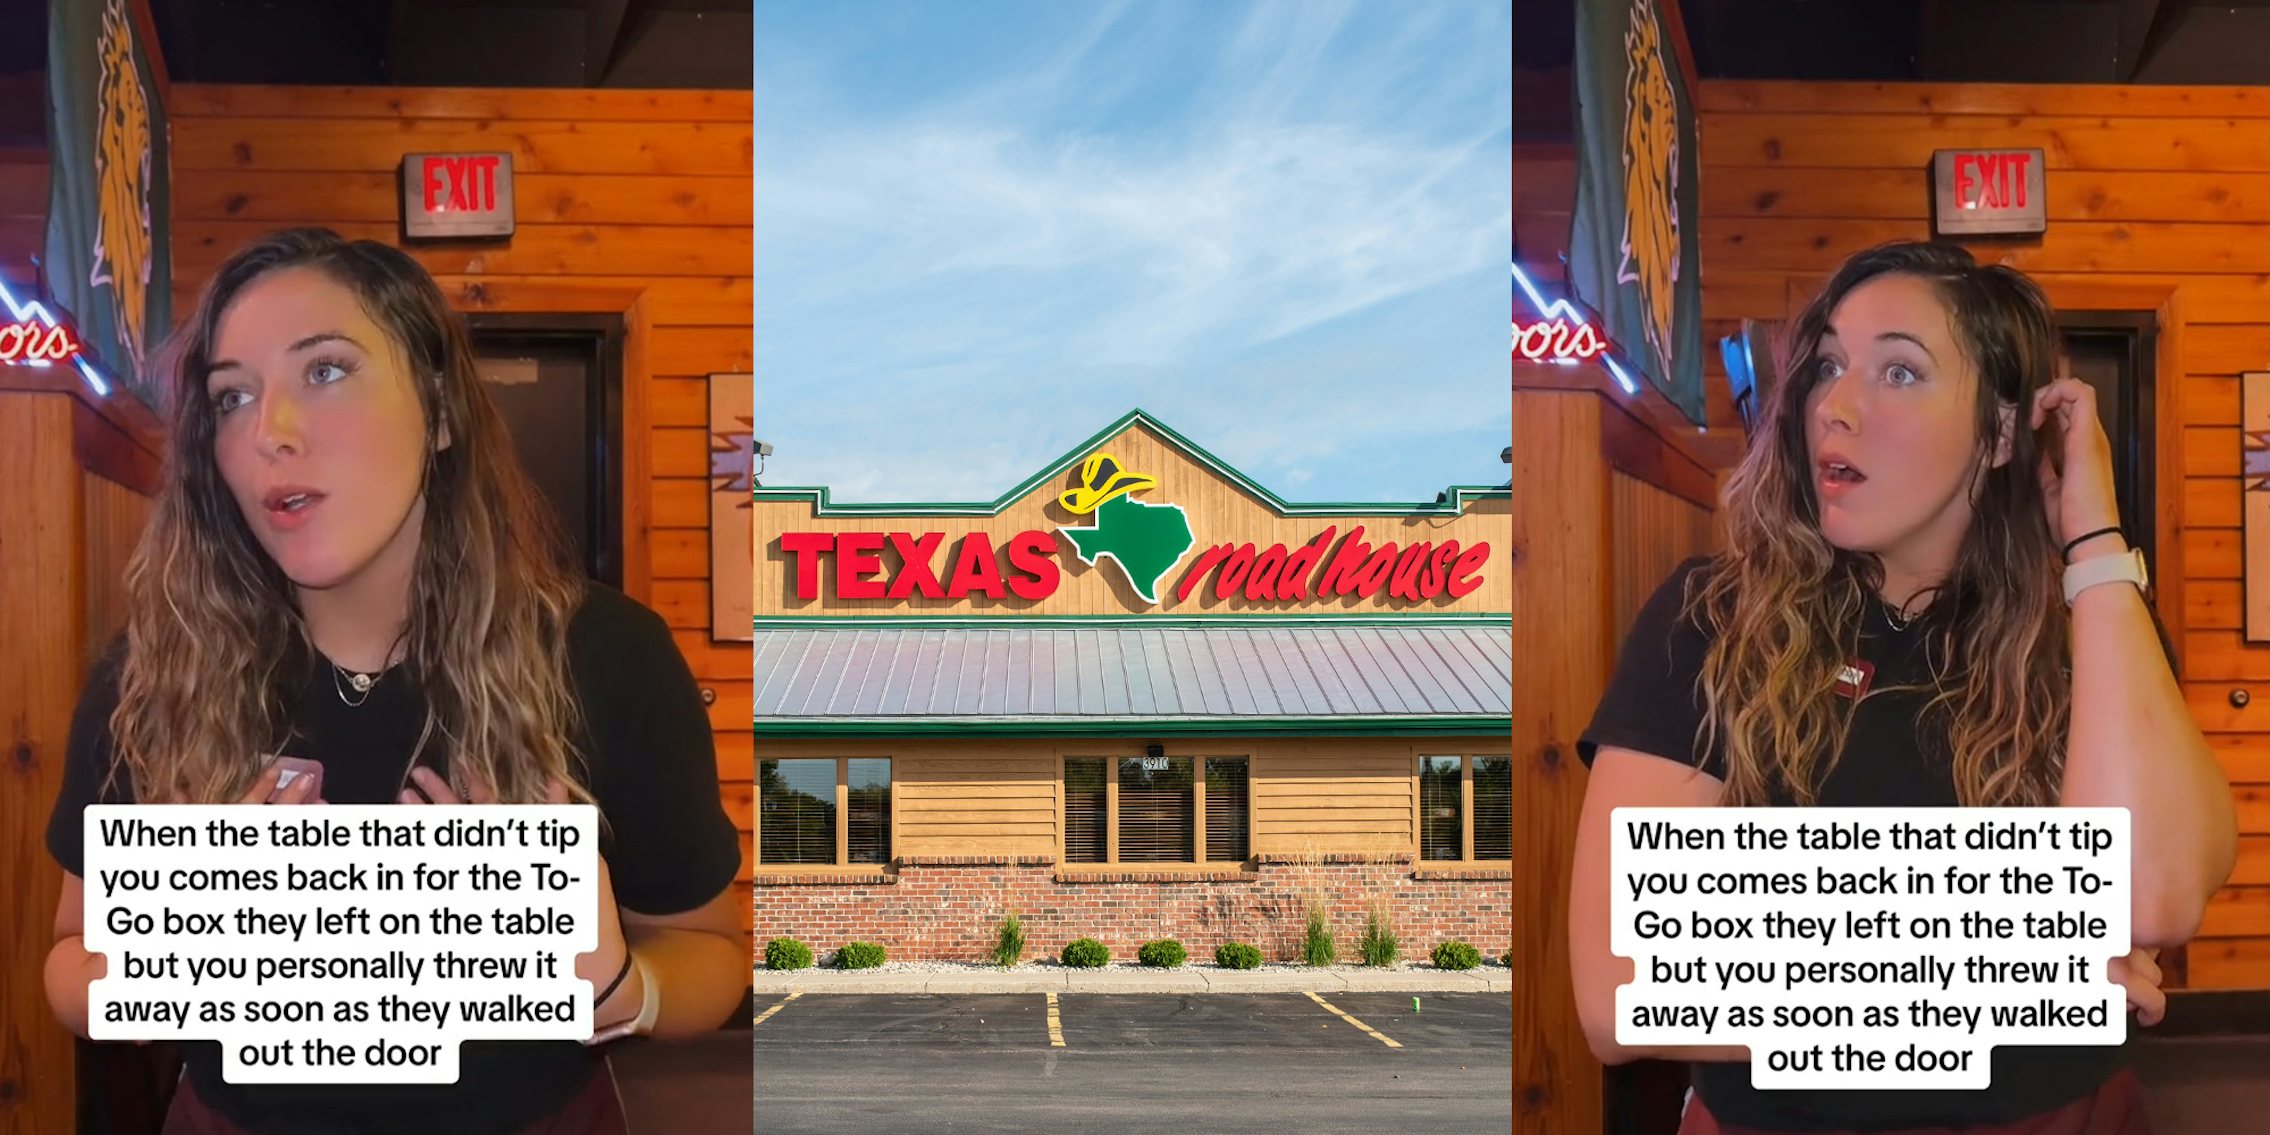 Texas Roadhouse worker gets revenge on customers that left to-box, didn't tip